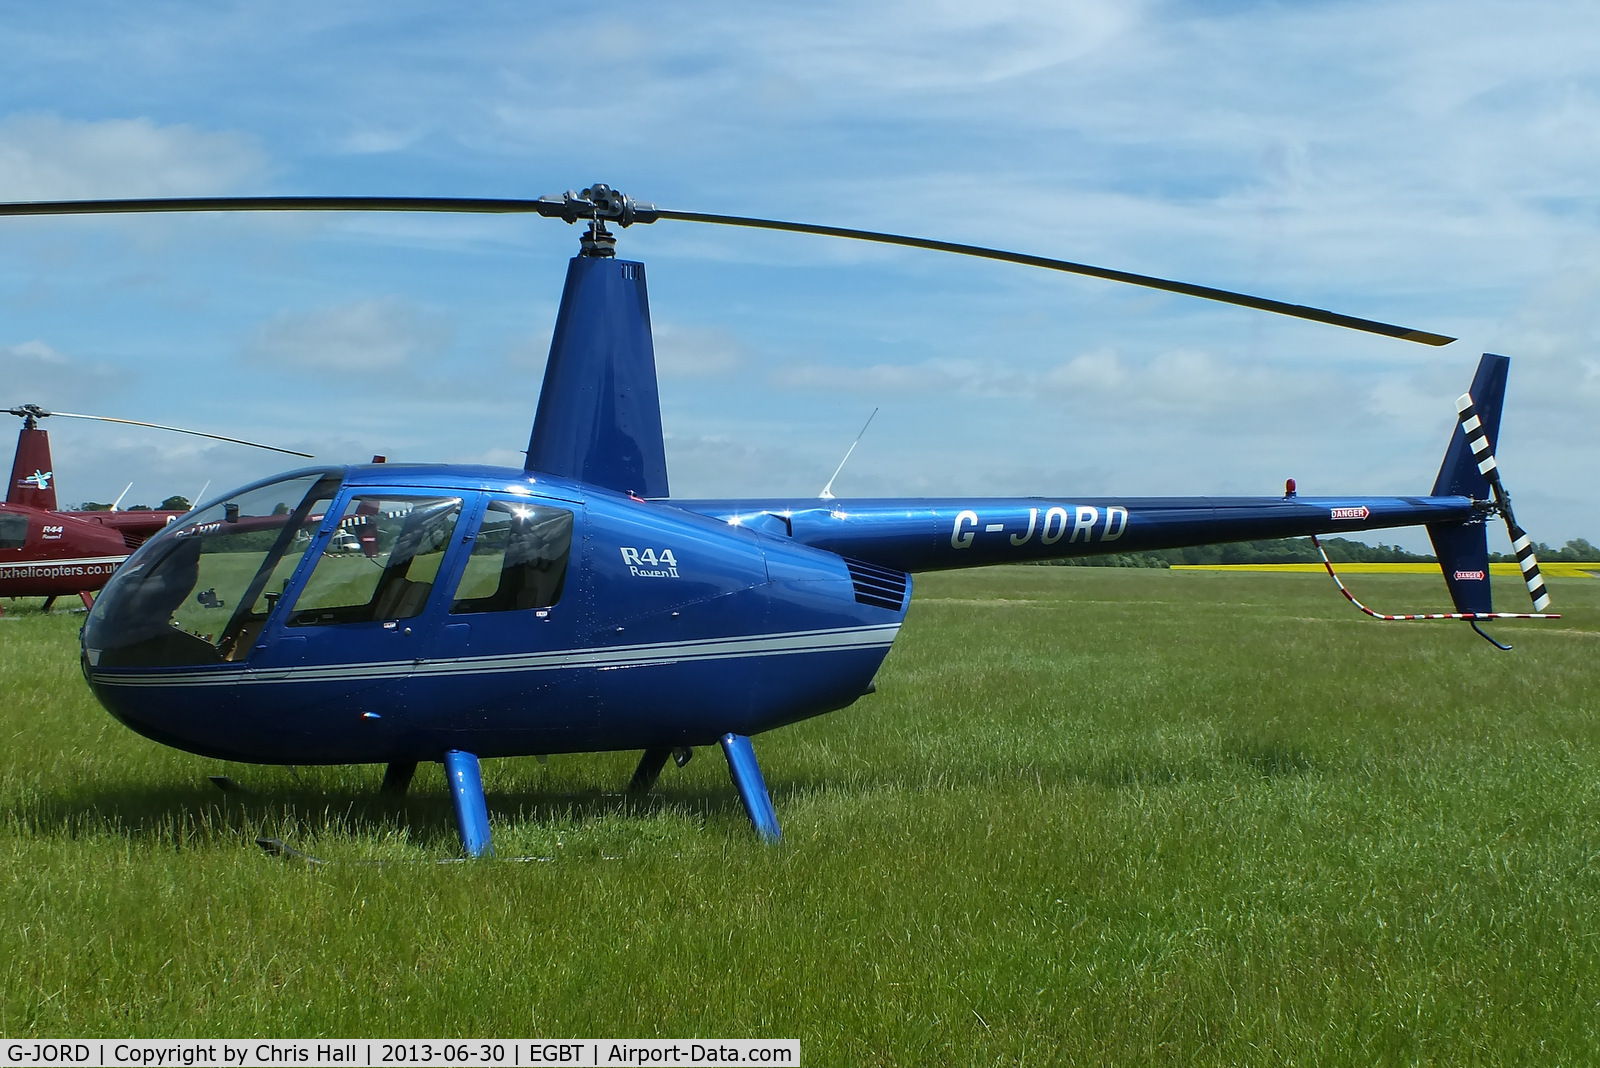 G-JORD, 2007 Robinson R44 II C/N 11725, being used for ferrying race fans to the British F1 Grand Prix at Silverstone